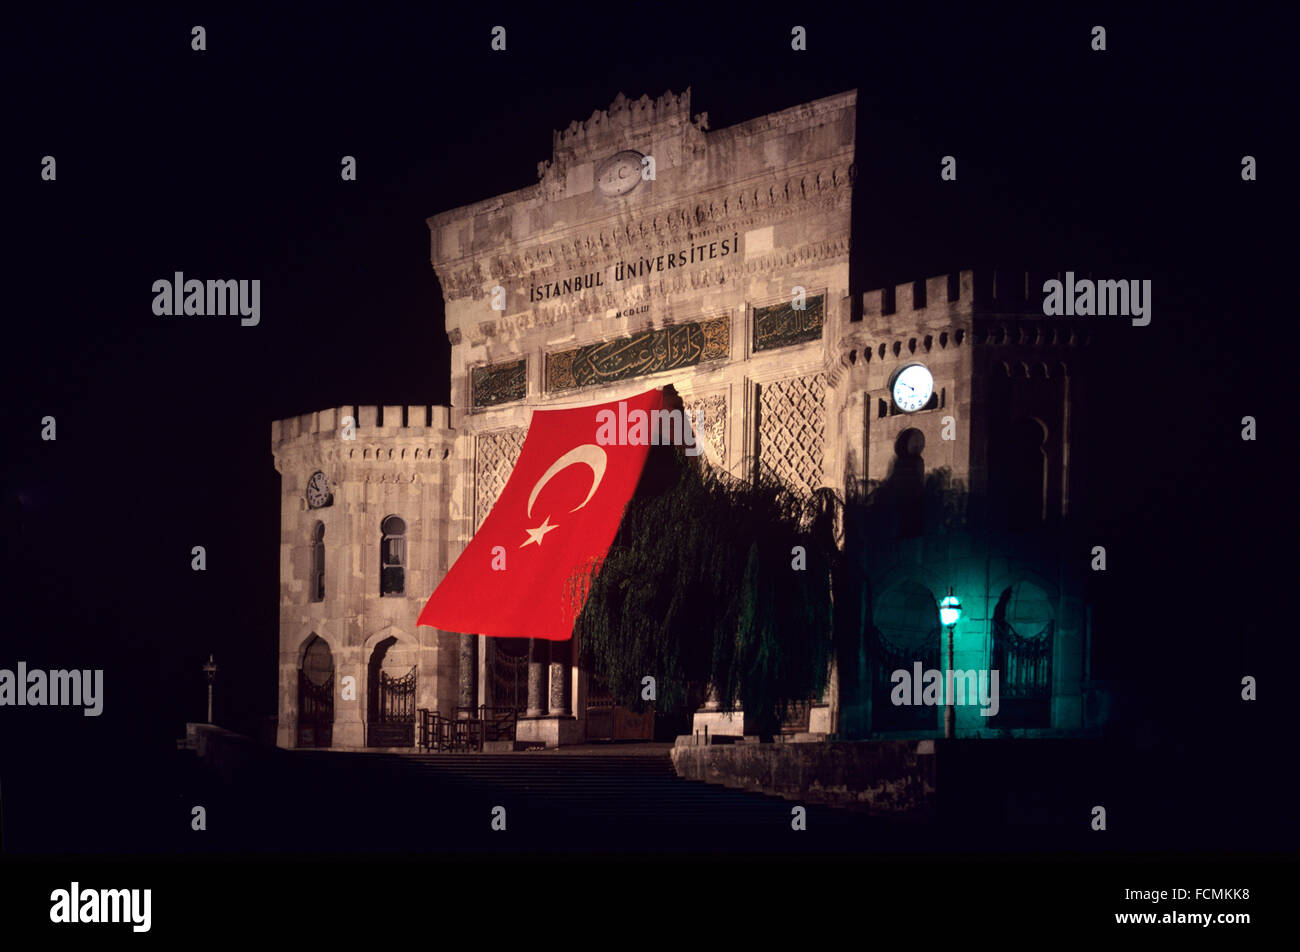 The Ottoman-Style Monumental Gate or Main Entrance of Istanbul University and the Turkish Flag lit at Night, on Beyazit Square, Istanbul, Turkey Stock Photo